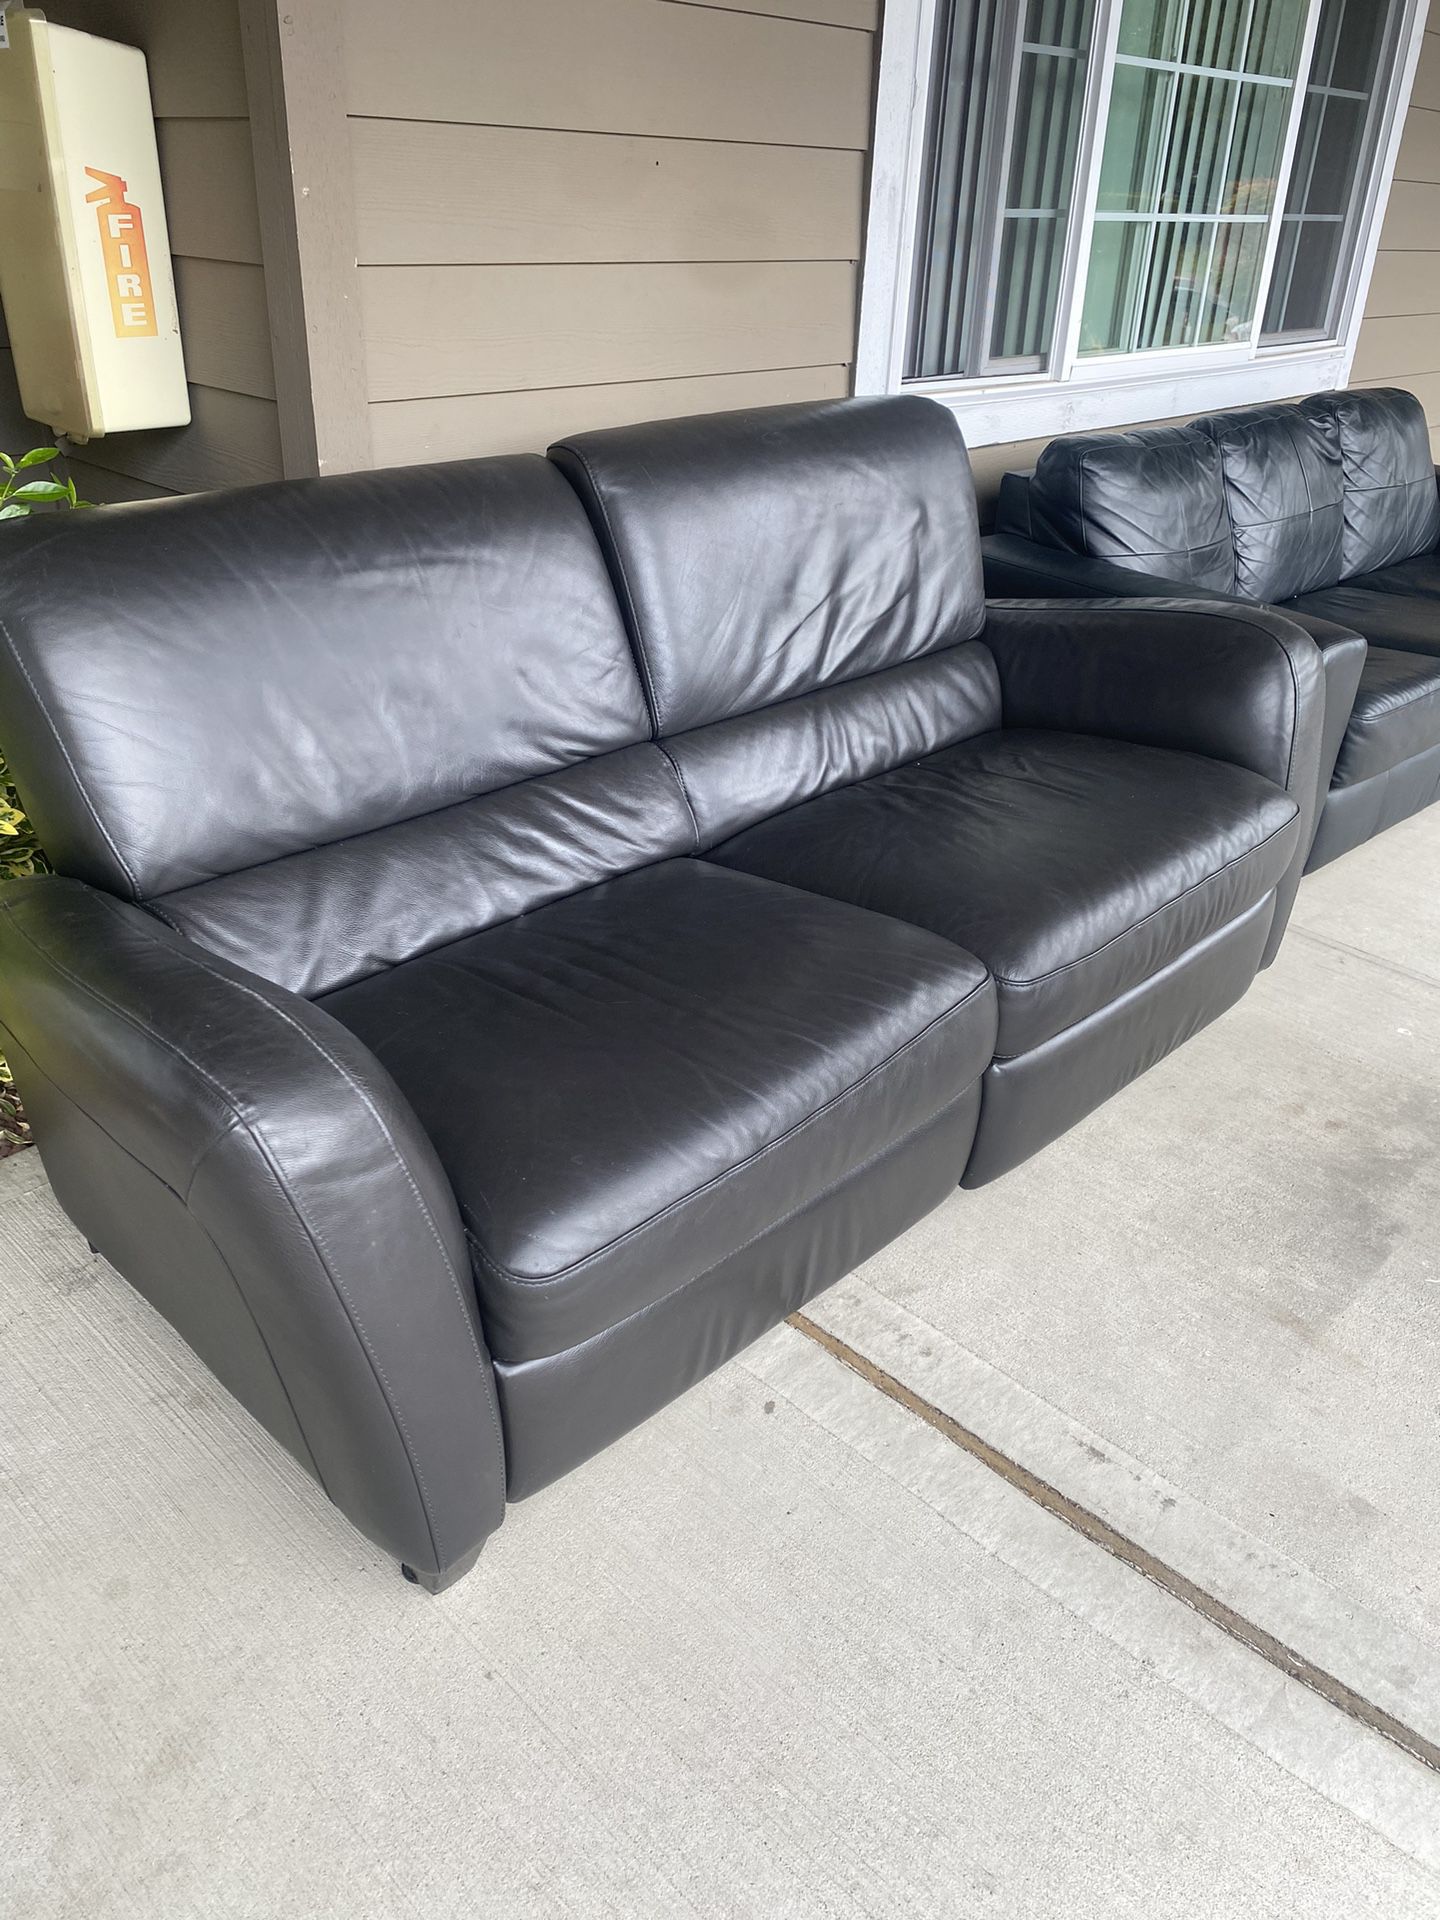 Real Leather Loveseat/recliner 